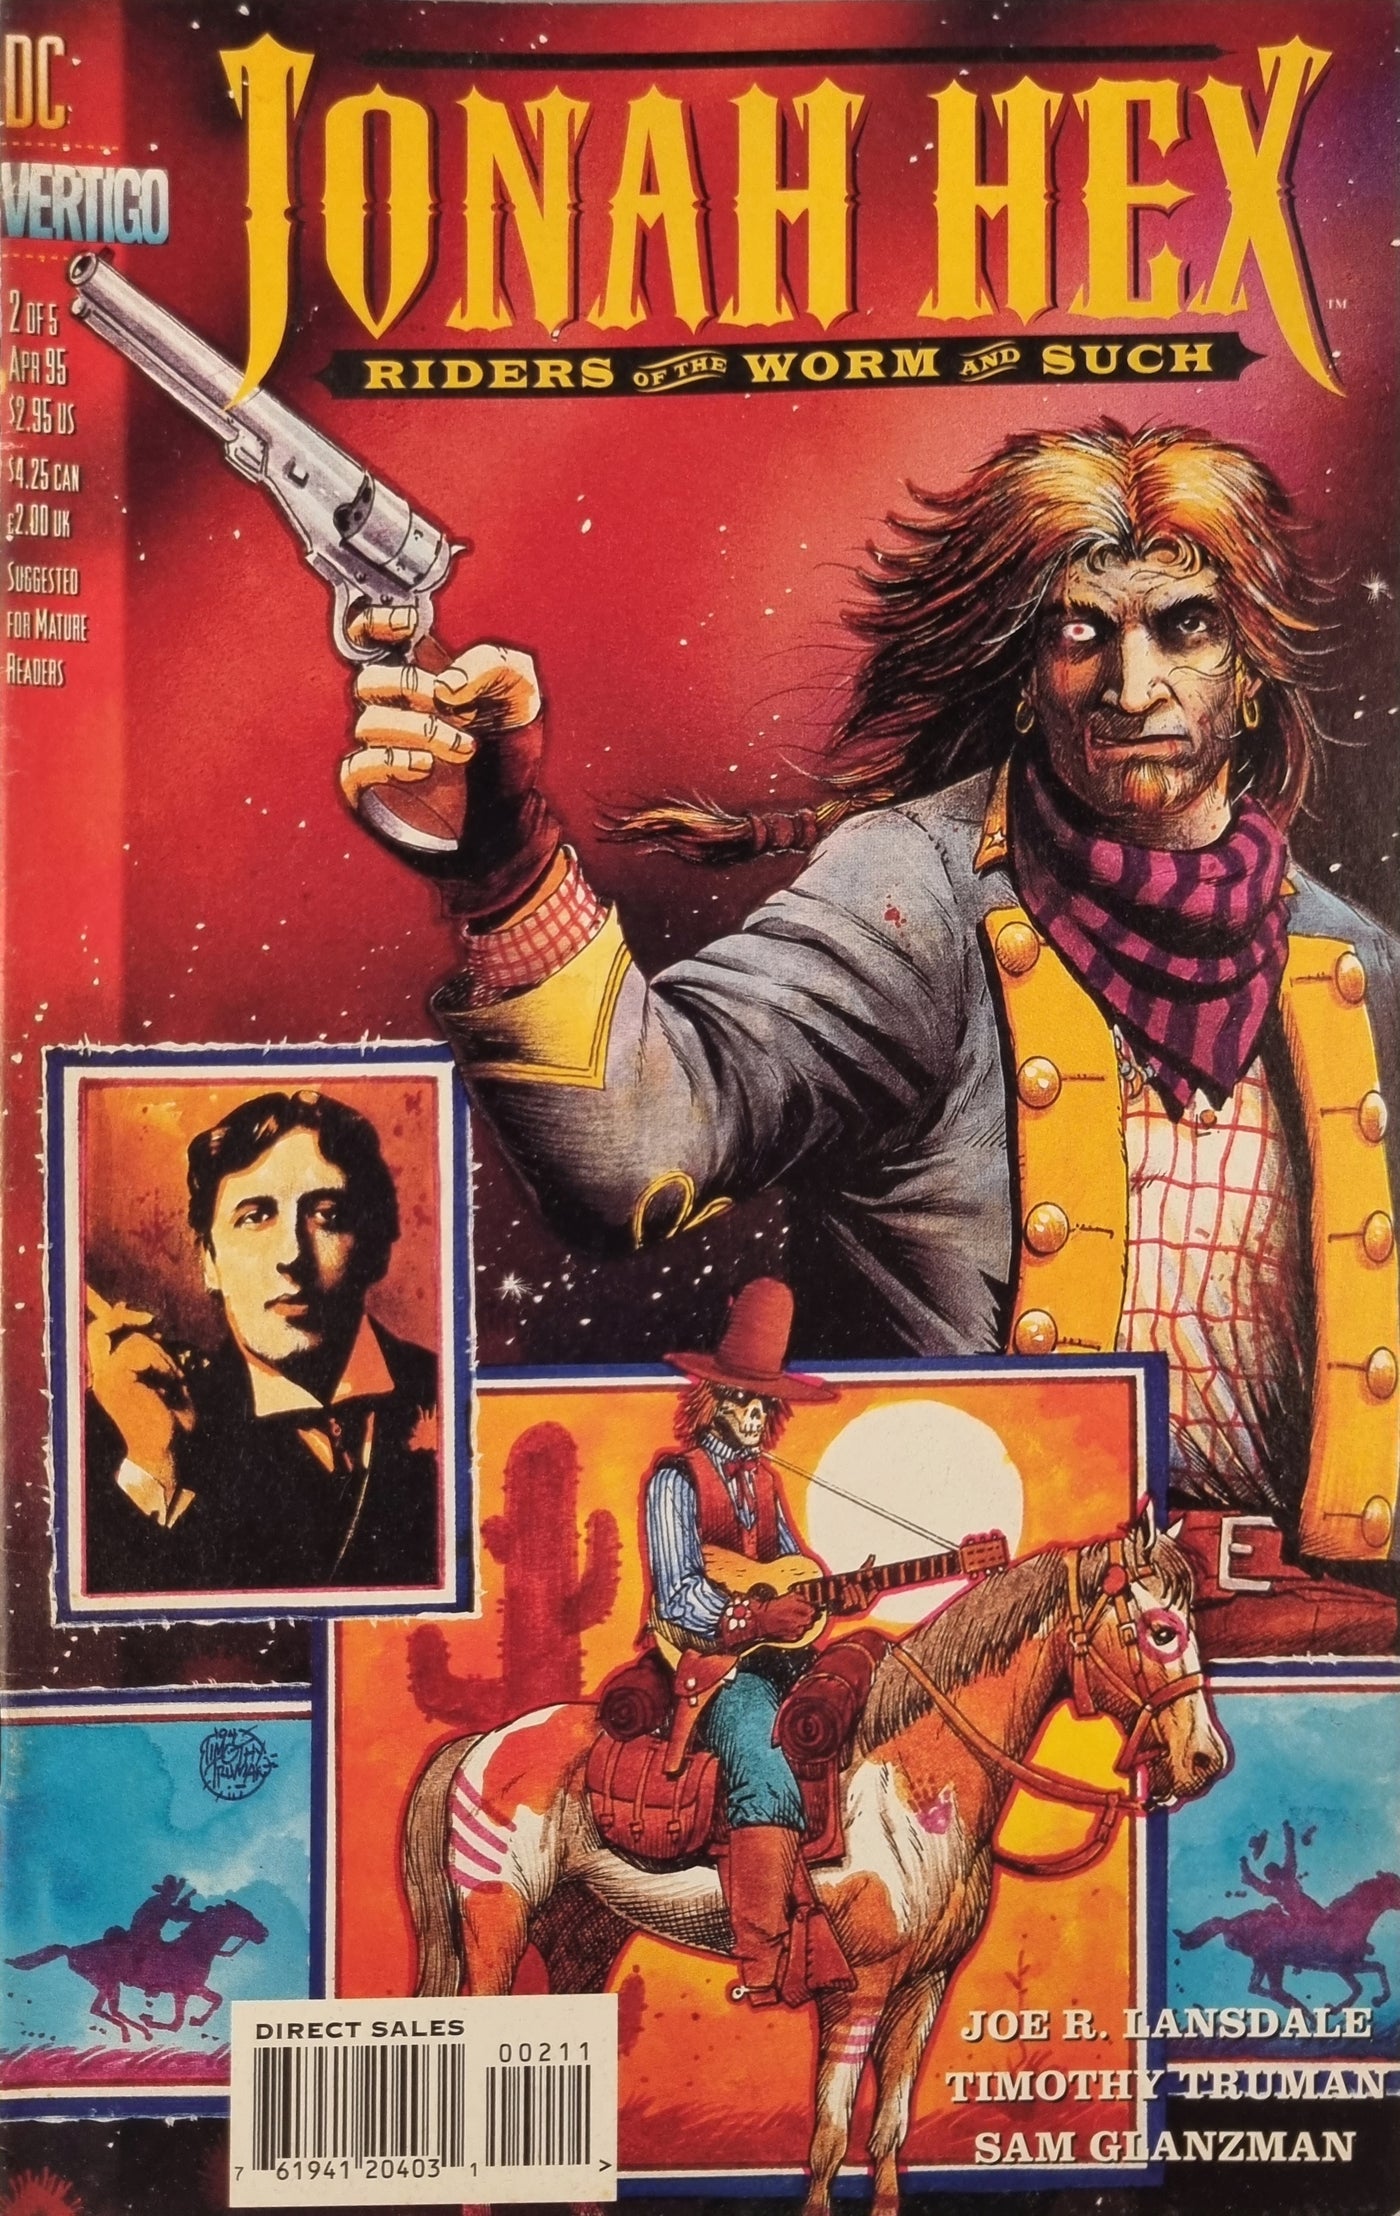 Jonah Hex: Riders of the Worm and Such #2 (of 5)